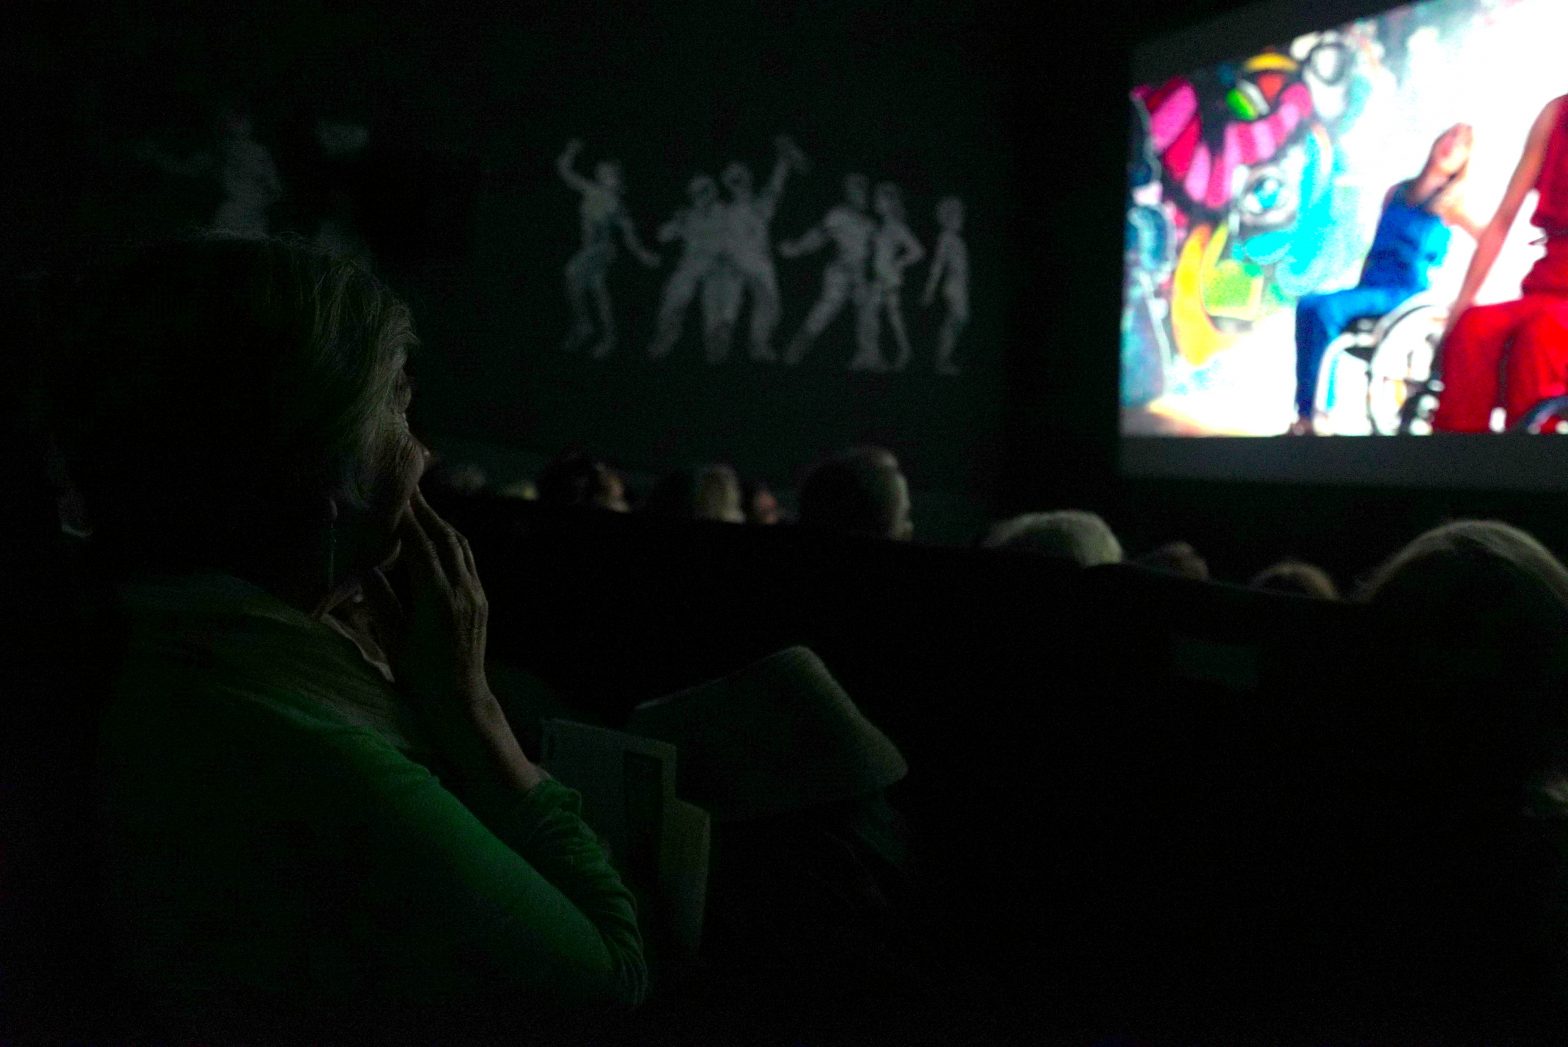 A film is showing on the cinema showing two dancers in bright outfits who use wheelchairs. The camera is focused on a woman watching the film, her hand to her mouth.